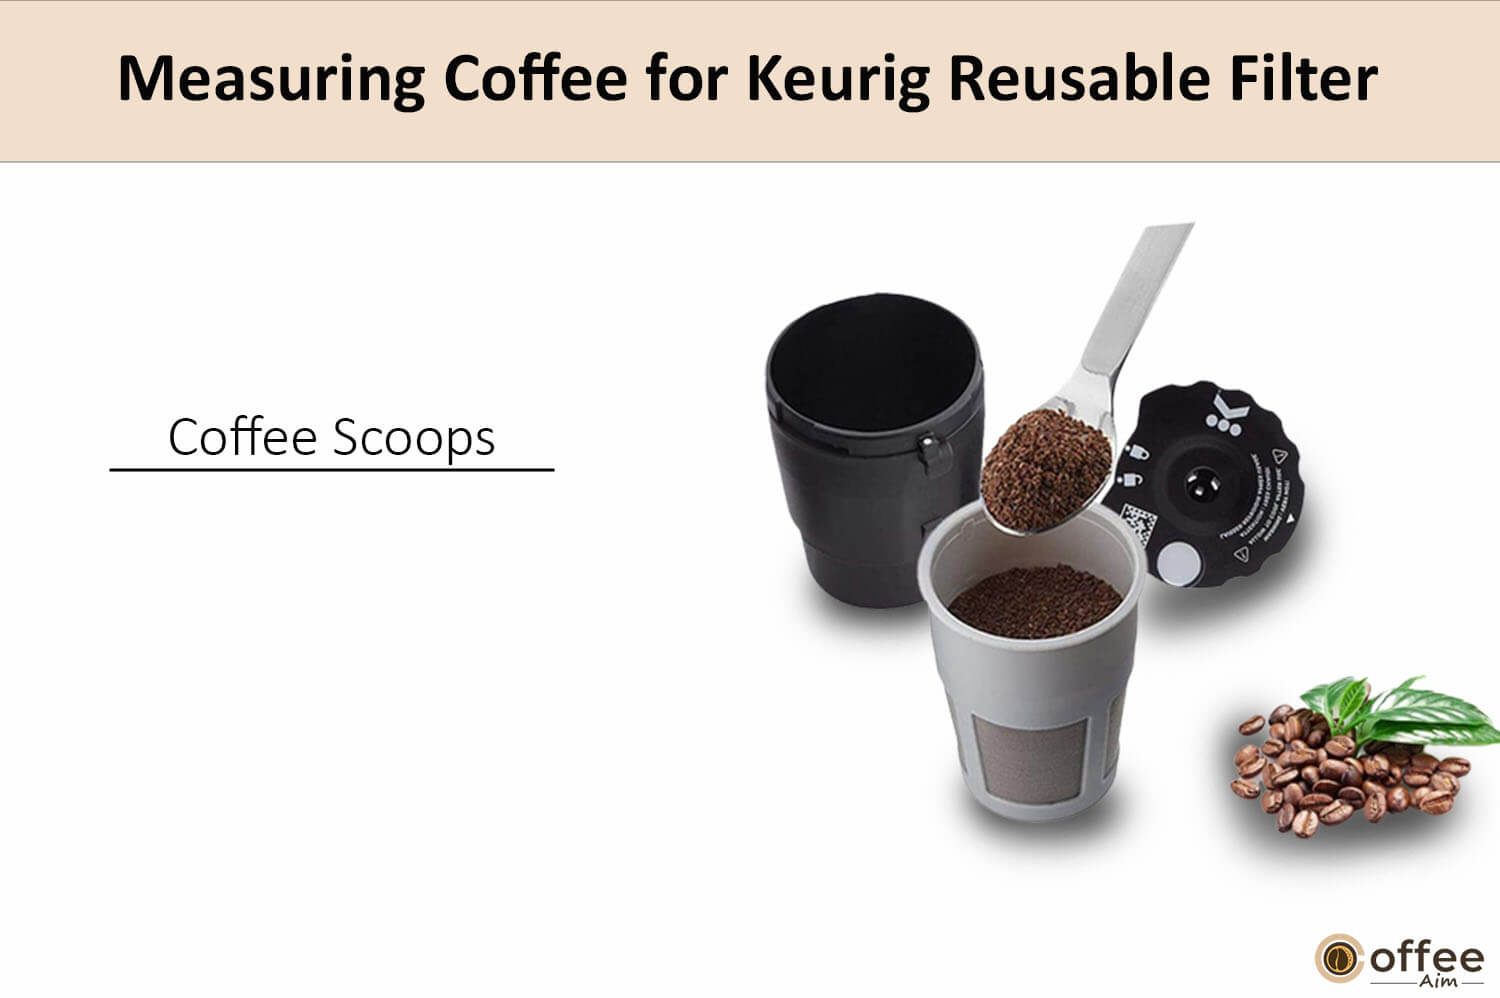 In this picture, I'm illustrating the measuring coffee for keurig reusable filter.